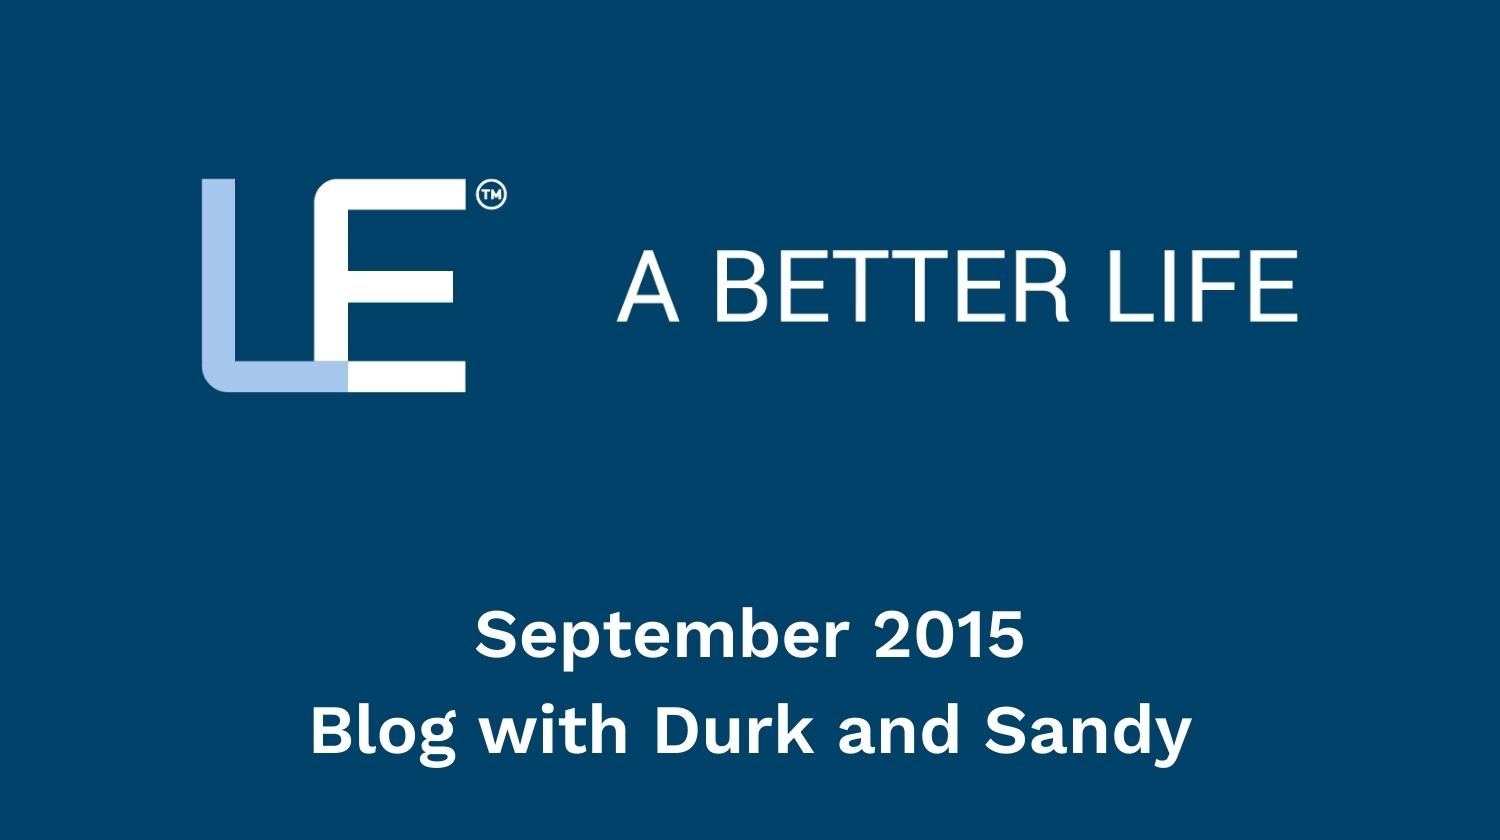 September 2015 Blog with Durk and Sandy